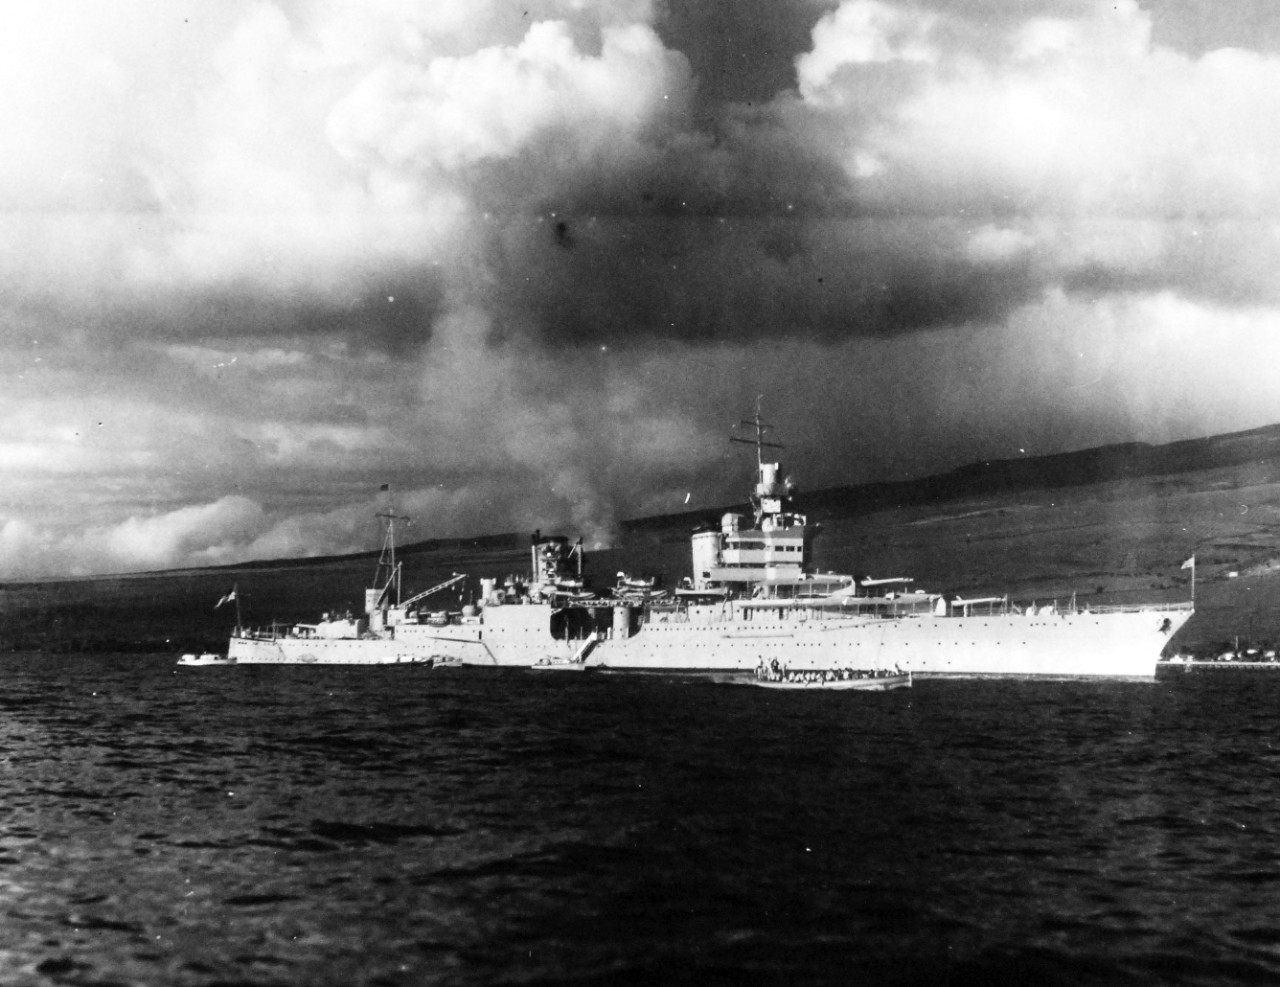 80-G-1050286:   USS Indianapolis (CA-35), 1934.  I ndianapolis with President Franklin D. Roosevelt on board during Presidential Review, May 31, 1934.  Photographed by USS Lexington (CV-2).      Official U.S. Navy Photograph, now in the collections of the National Archives.  (2017/09/19).